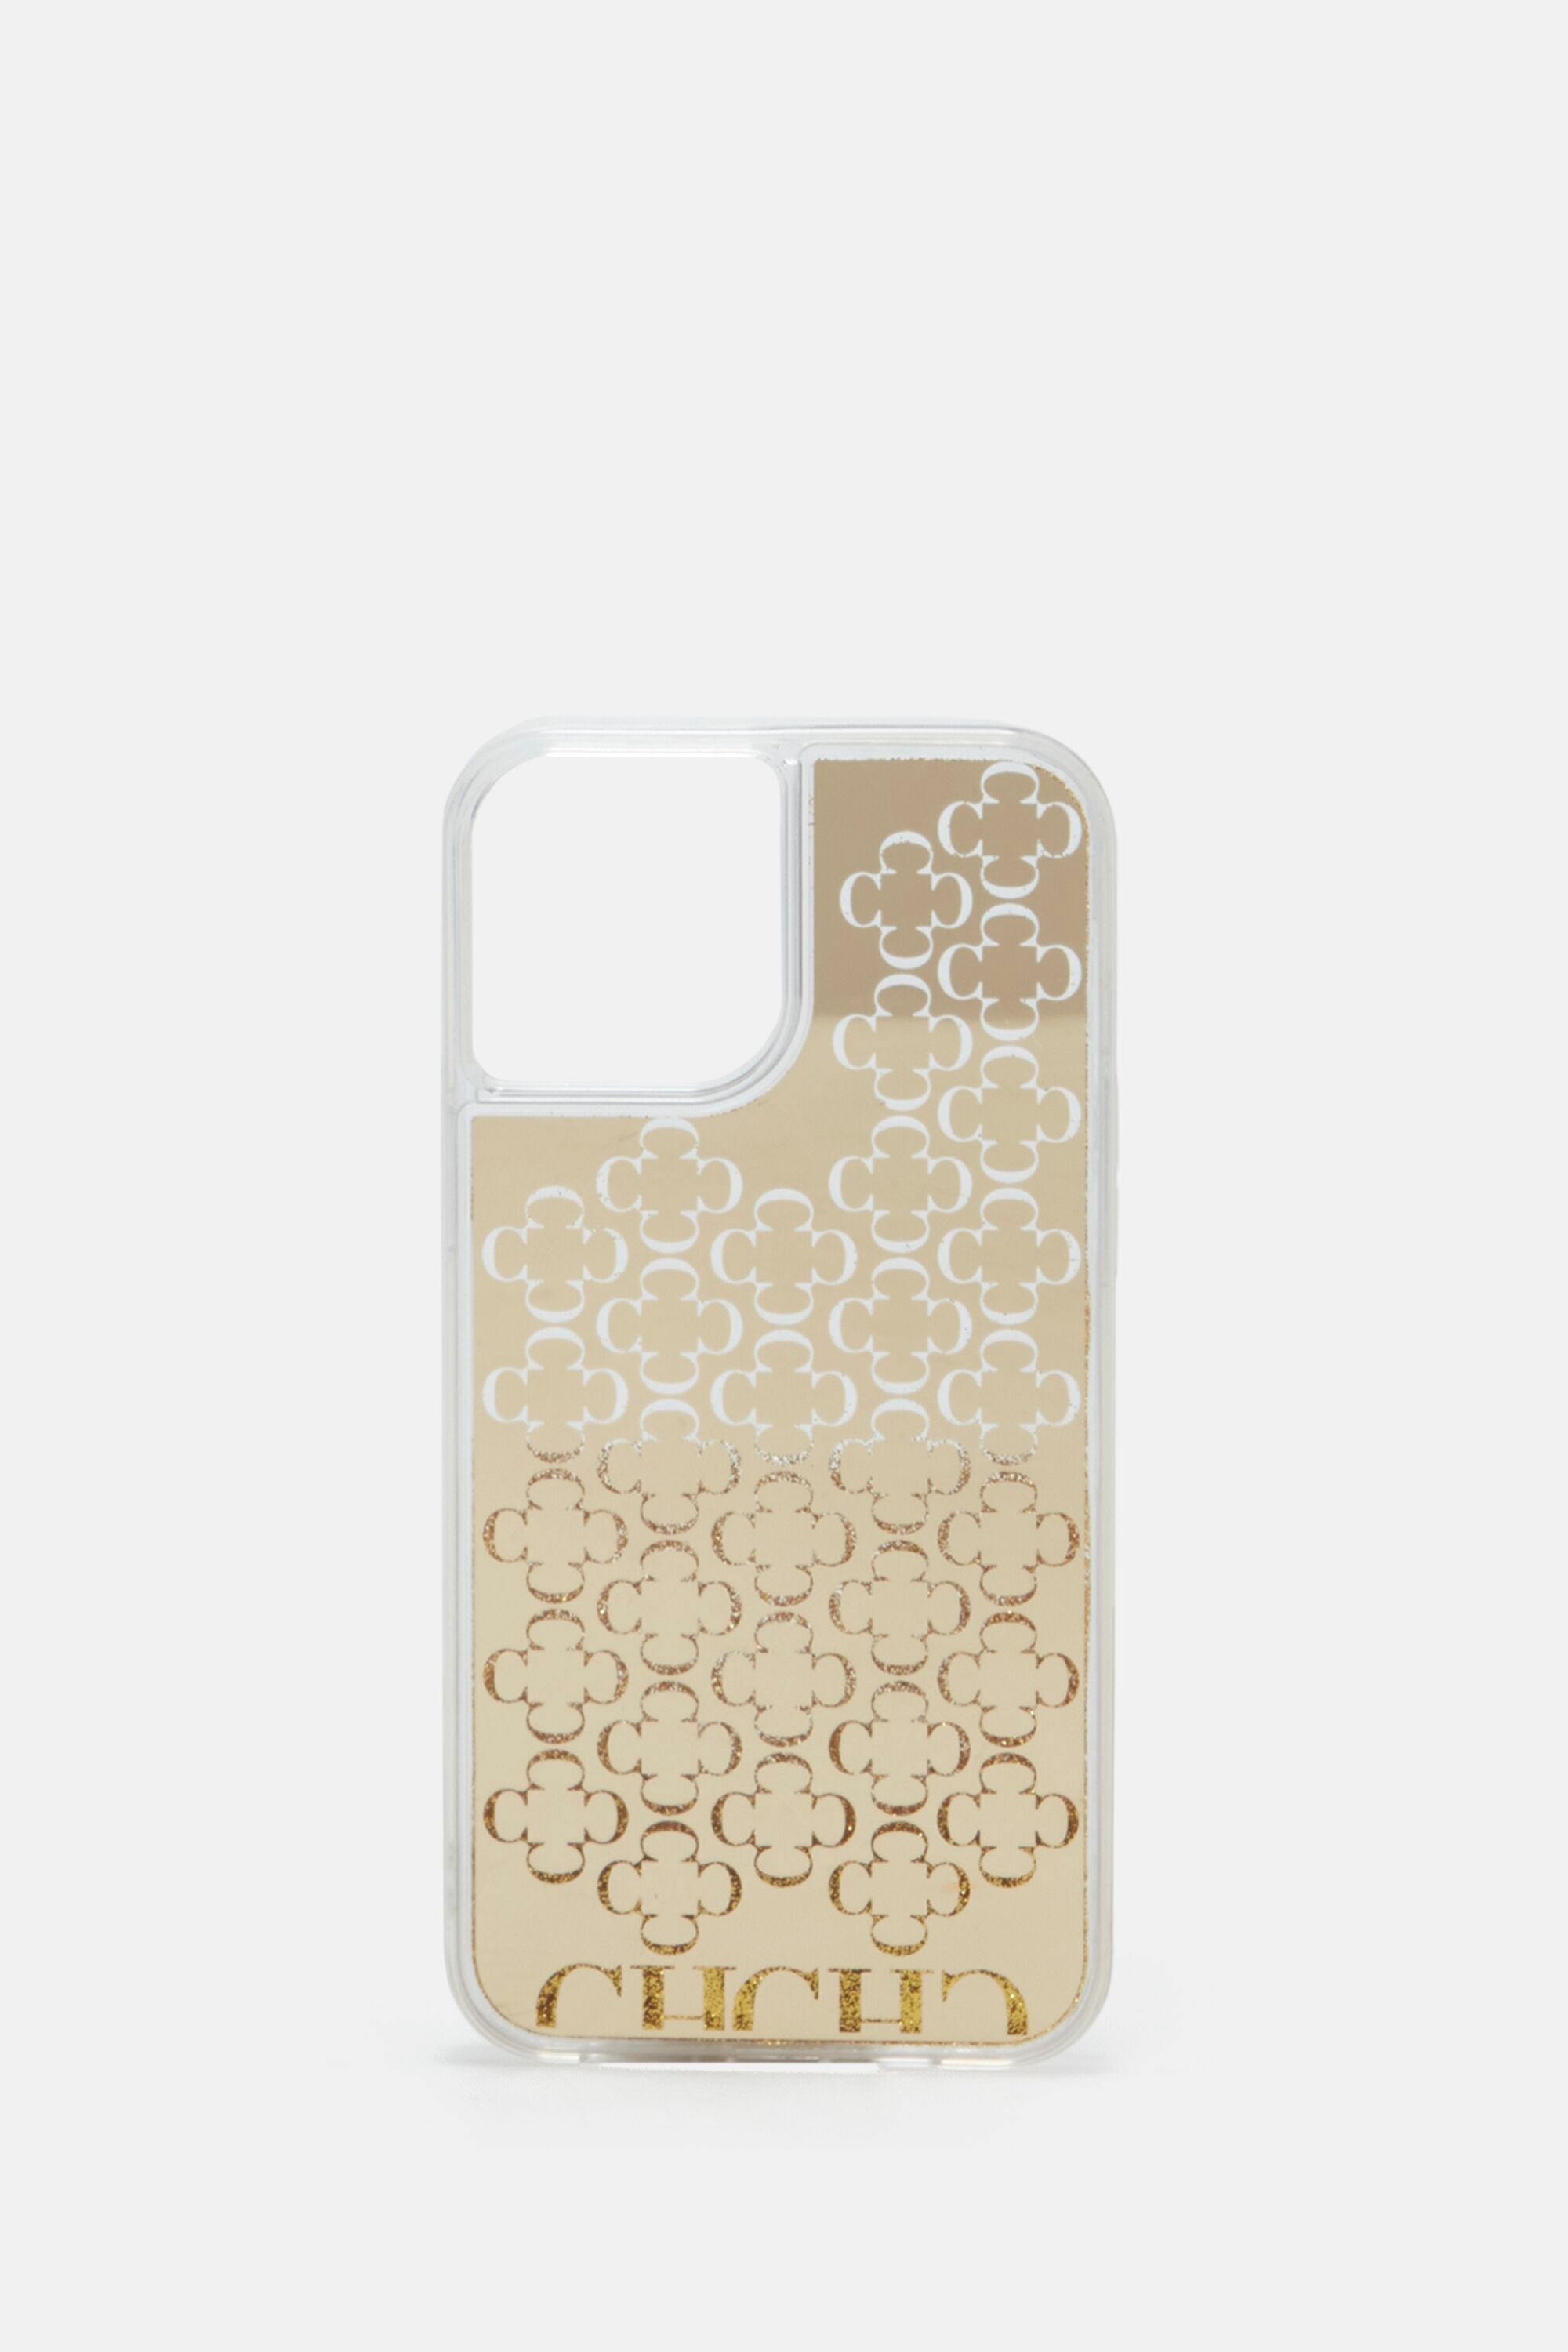 Royal | iPhone 12 Pro Max case